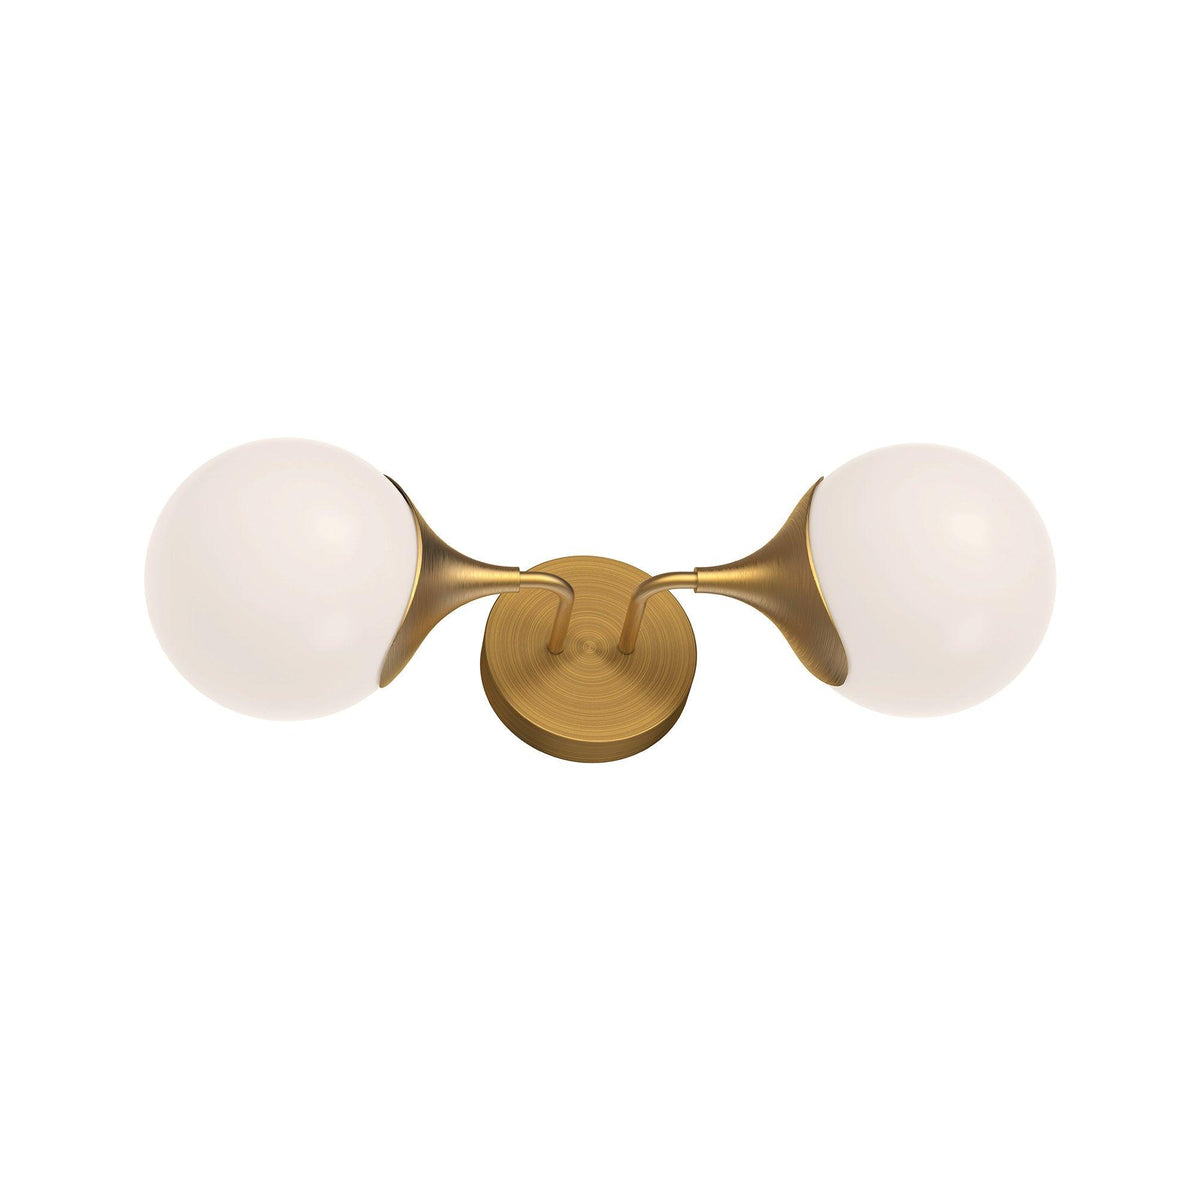 Alora Lighting - Nouveau Double Wall Sconce - WV505219AGOP | Montreal Lighting & Hardware